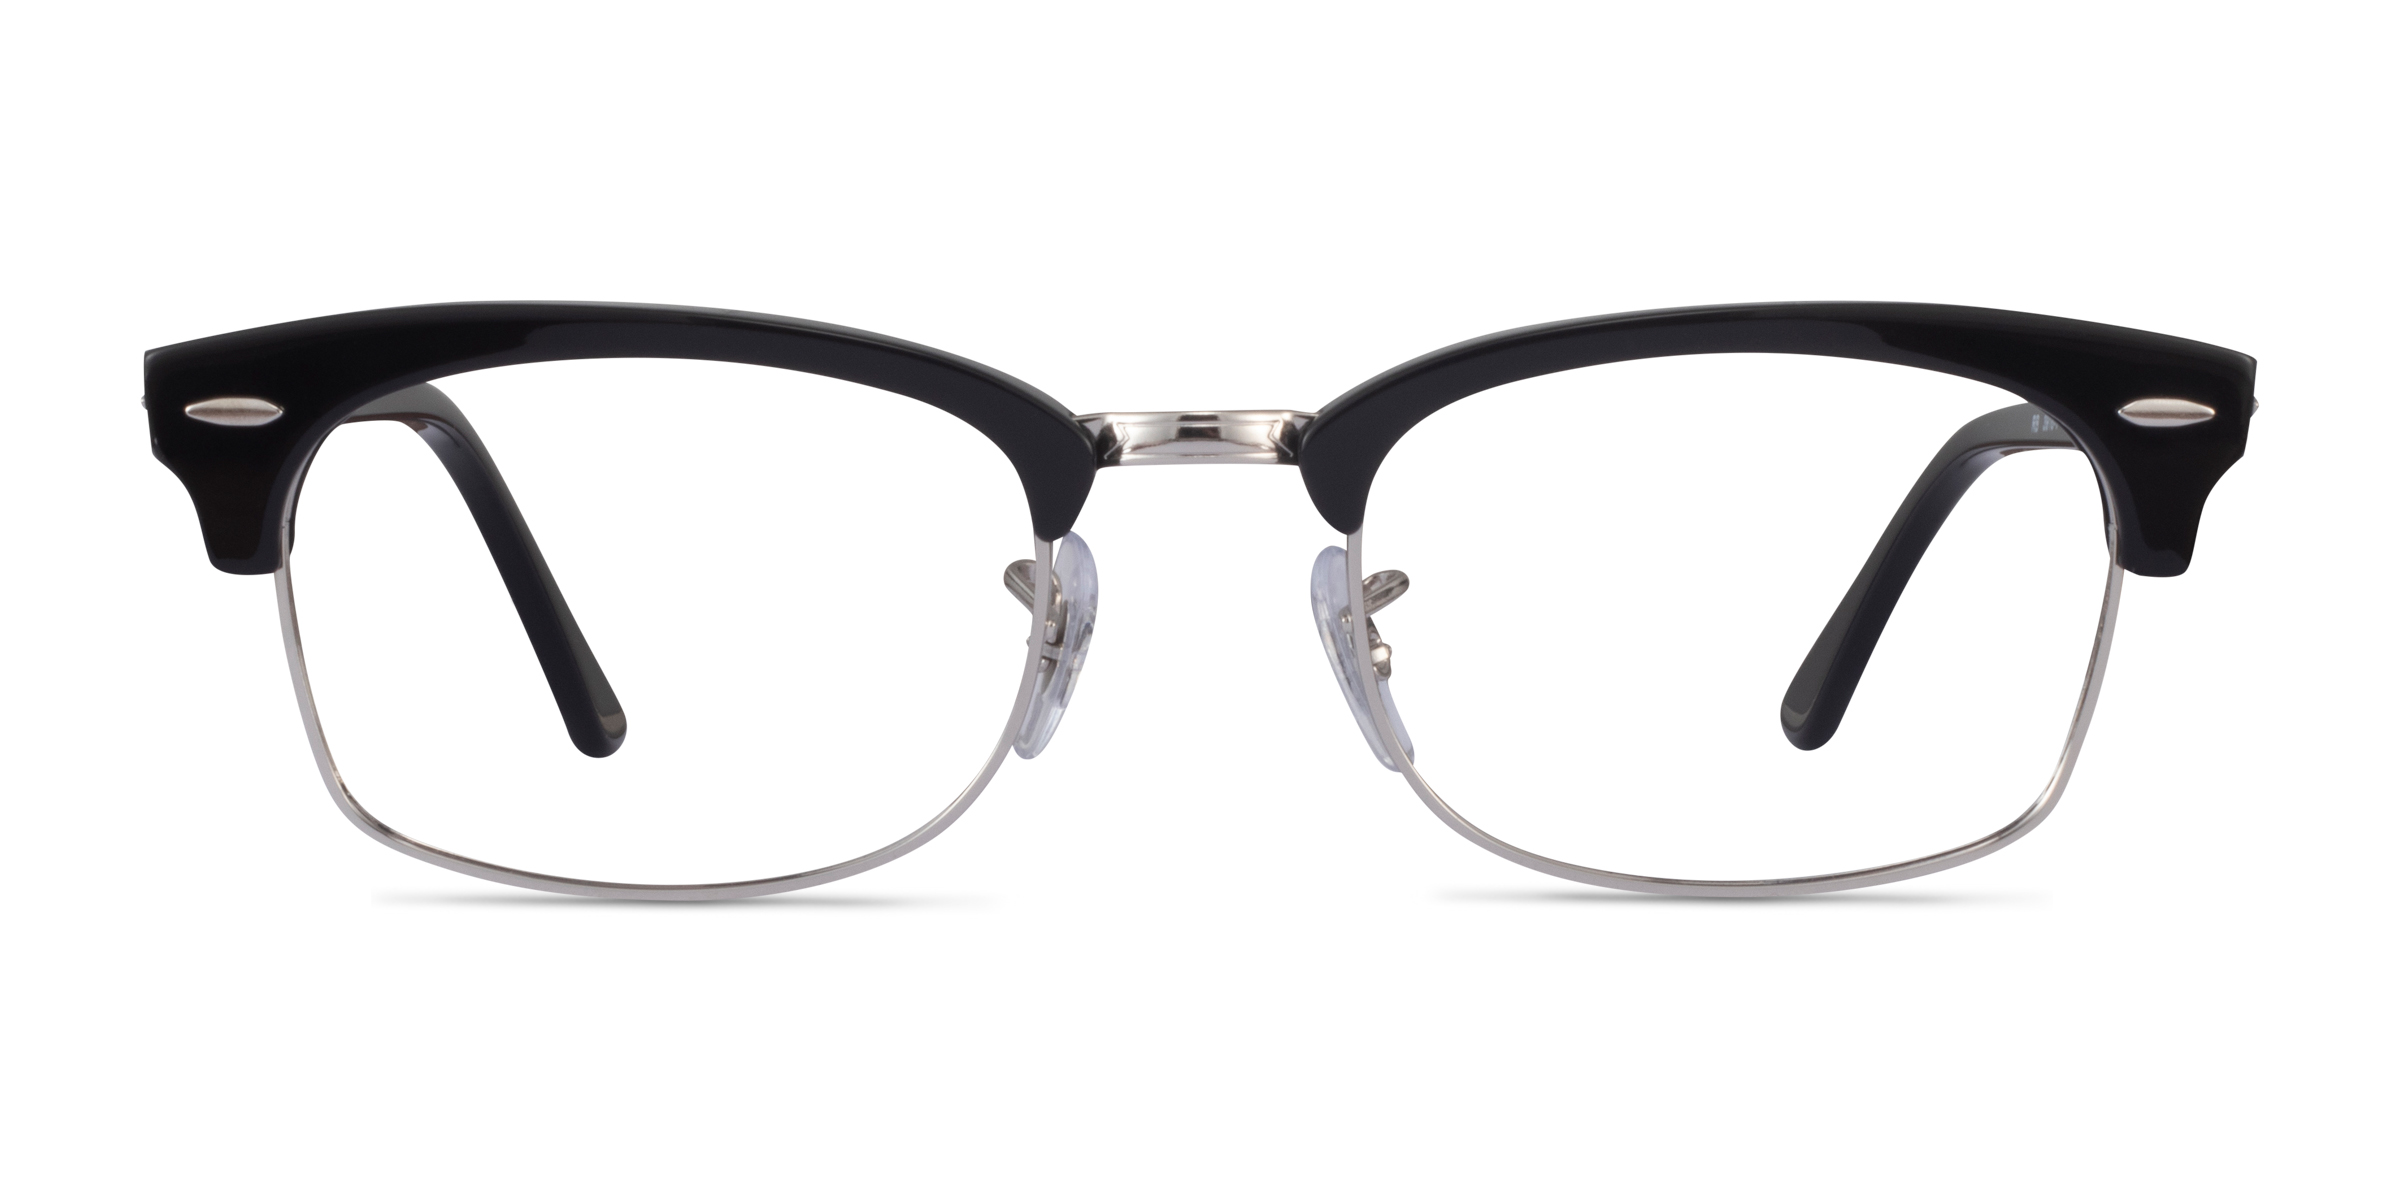 Ray Ban Clubmaster Square Browline Black And Silver Frame Eyeglasses